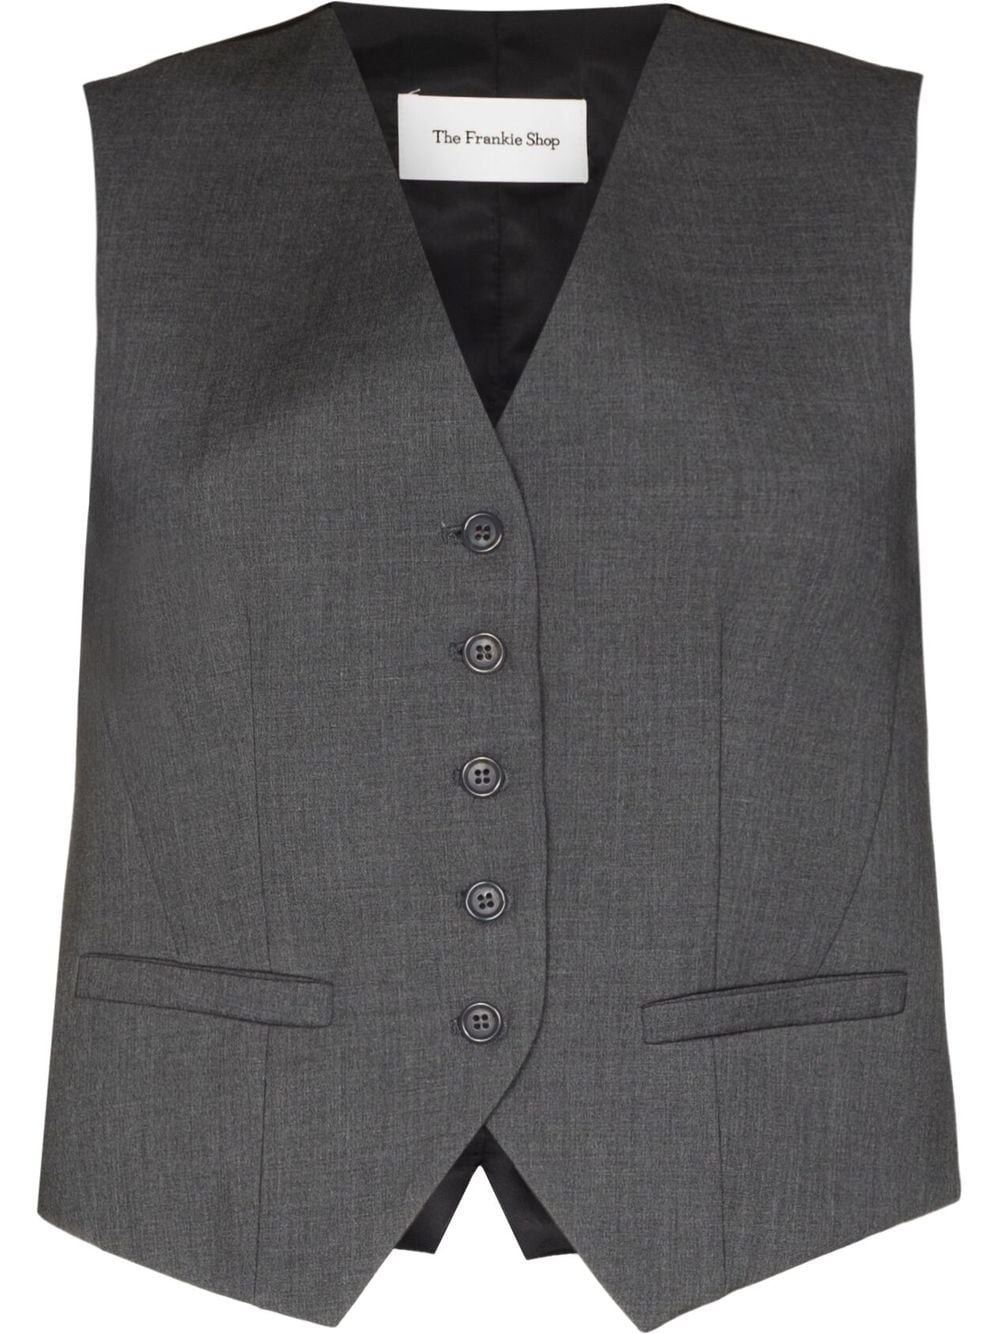 Gelso button-front waistcoat